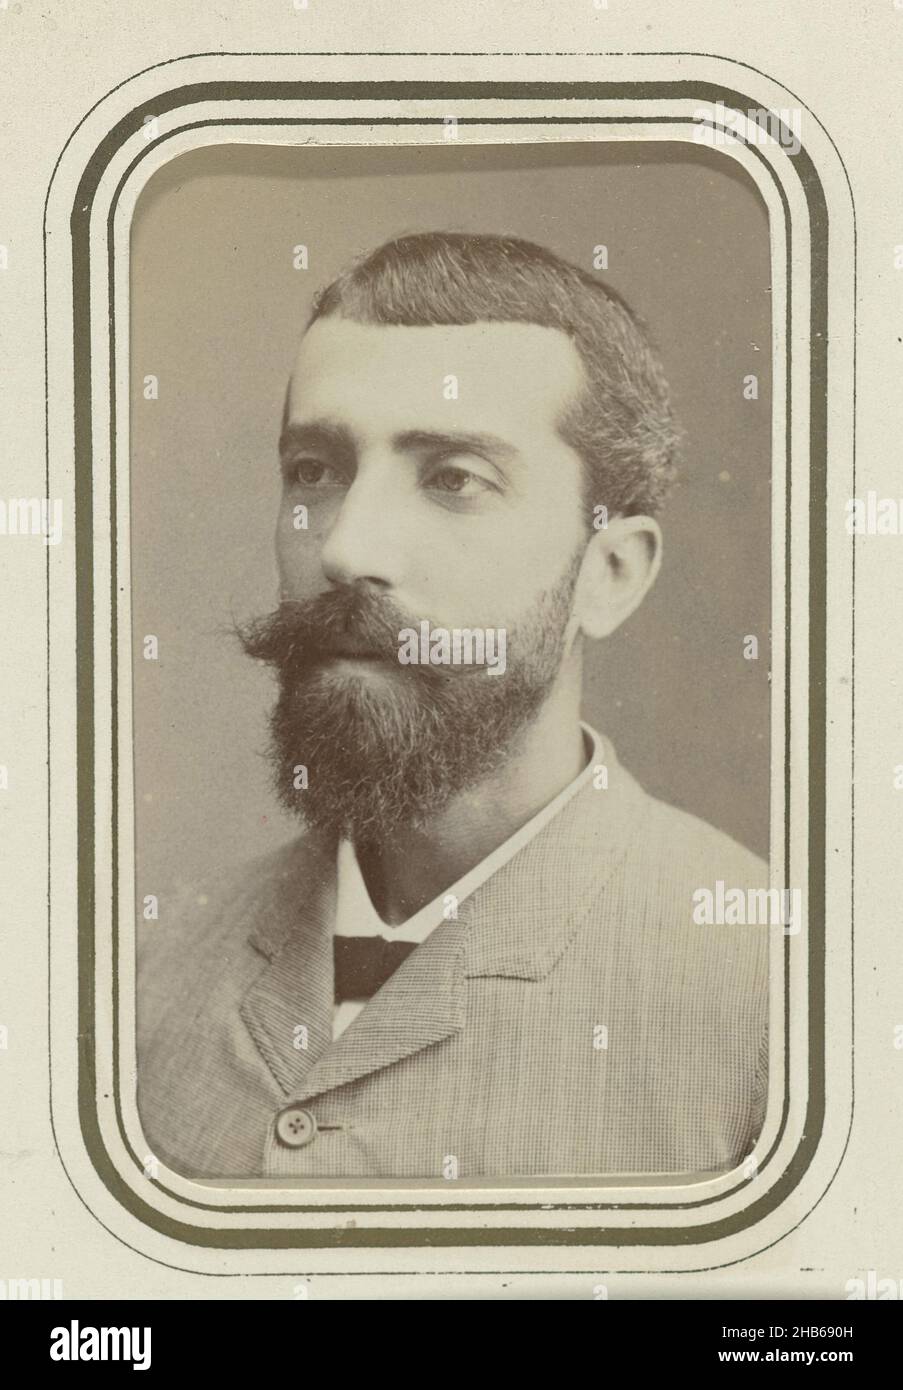 Man portrait, Carte-de-visite with the portrait of an unknown man. Probably one of the providers of the photo album. Inserted in the photo album offered to J.M. Pijnacker Hordijk upon his departure from Yogyakarta in 1886., anonymous, Dutch East Indies, The (possibly), 1880 - 1886, photographic support, height 88 mm × width 53 mm Stock Photo